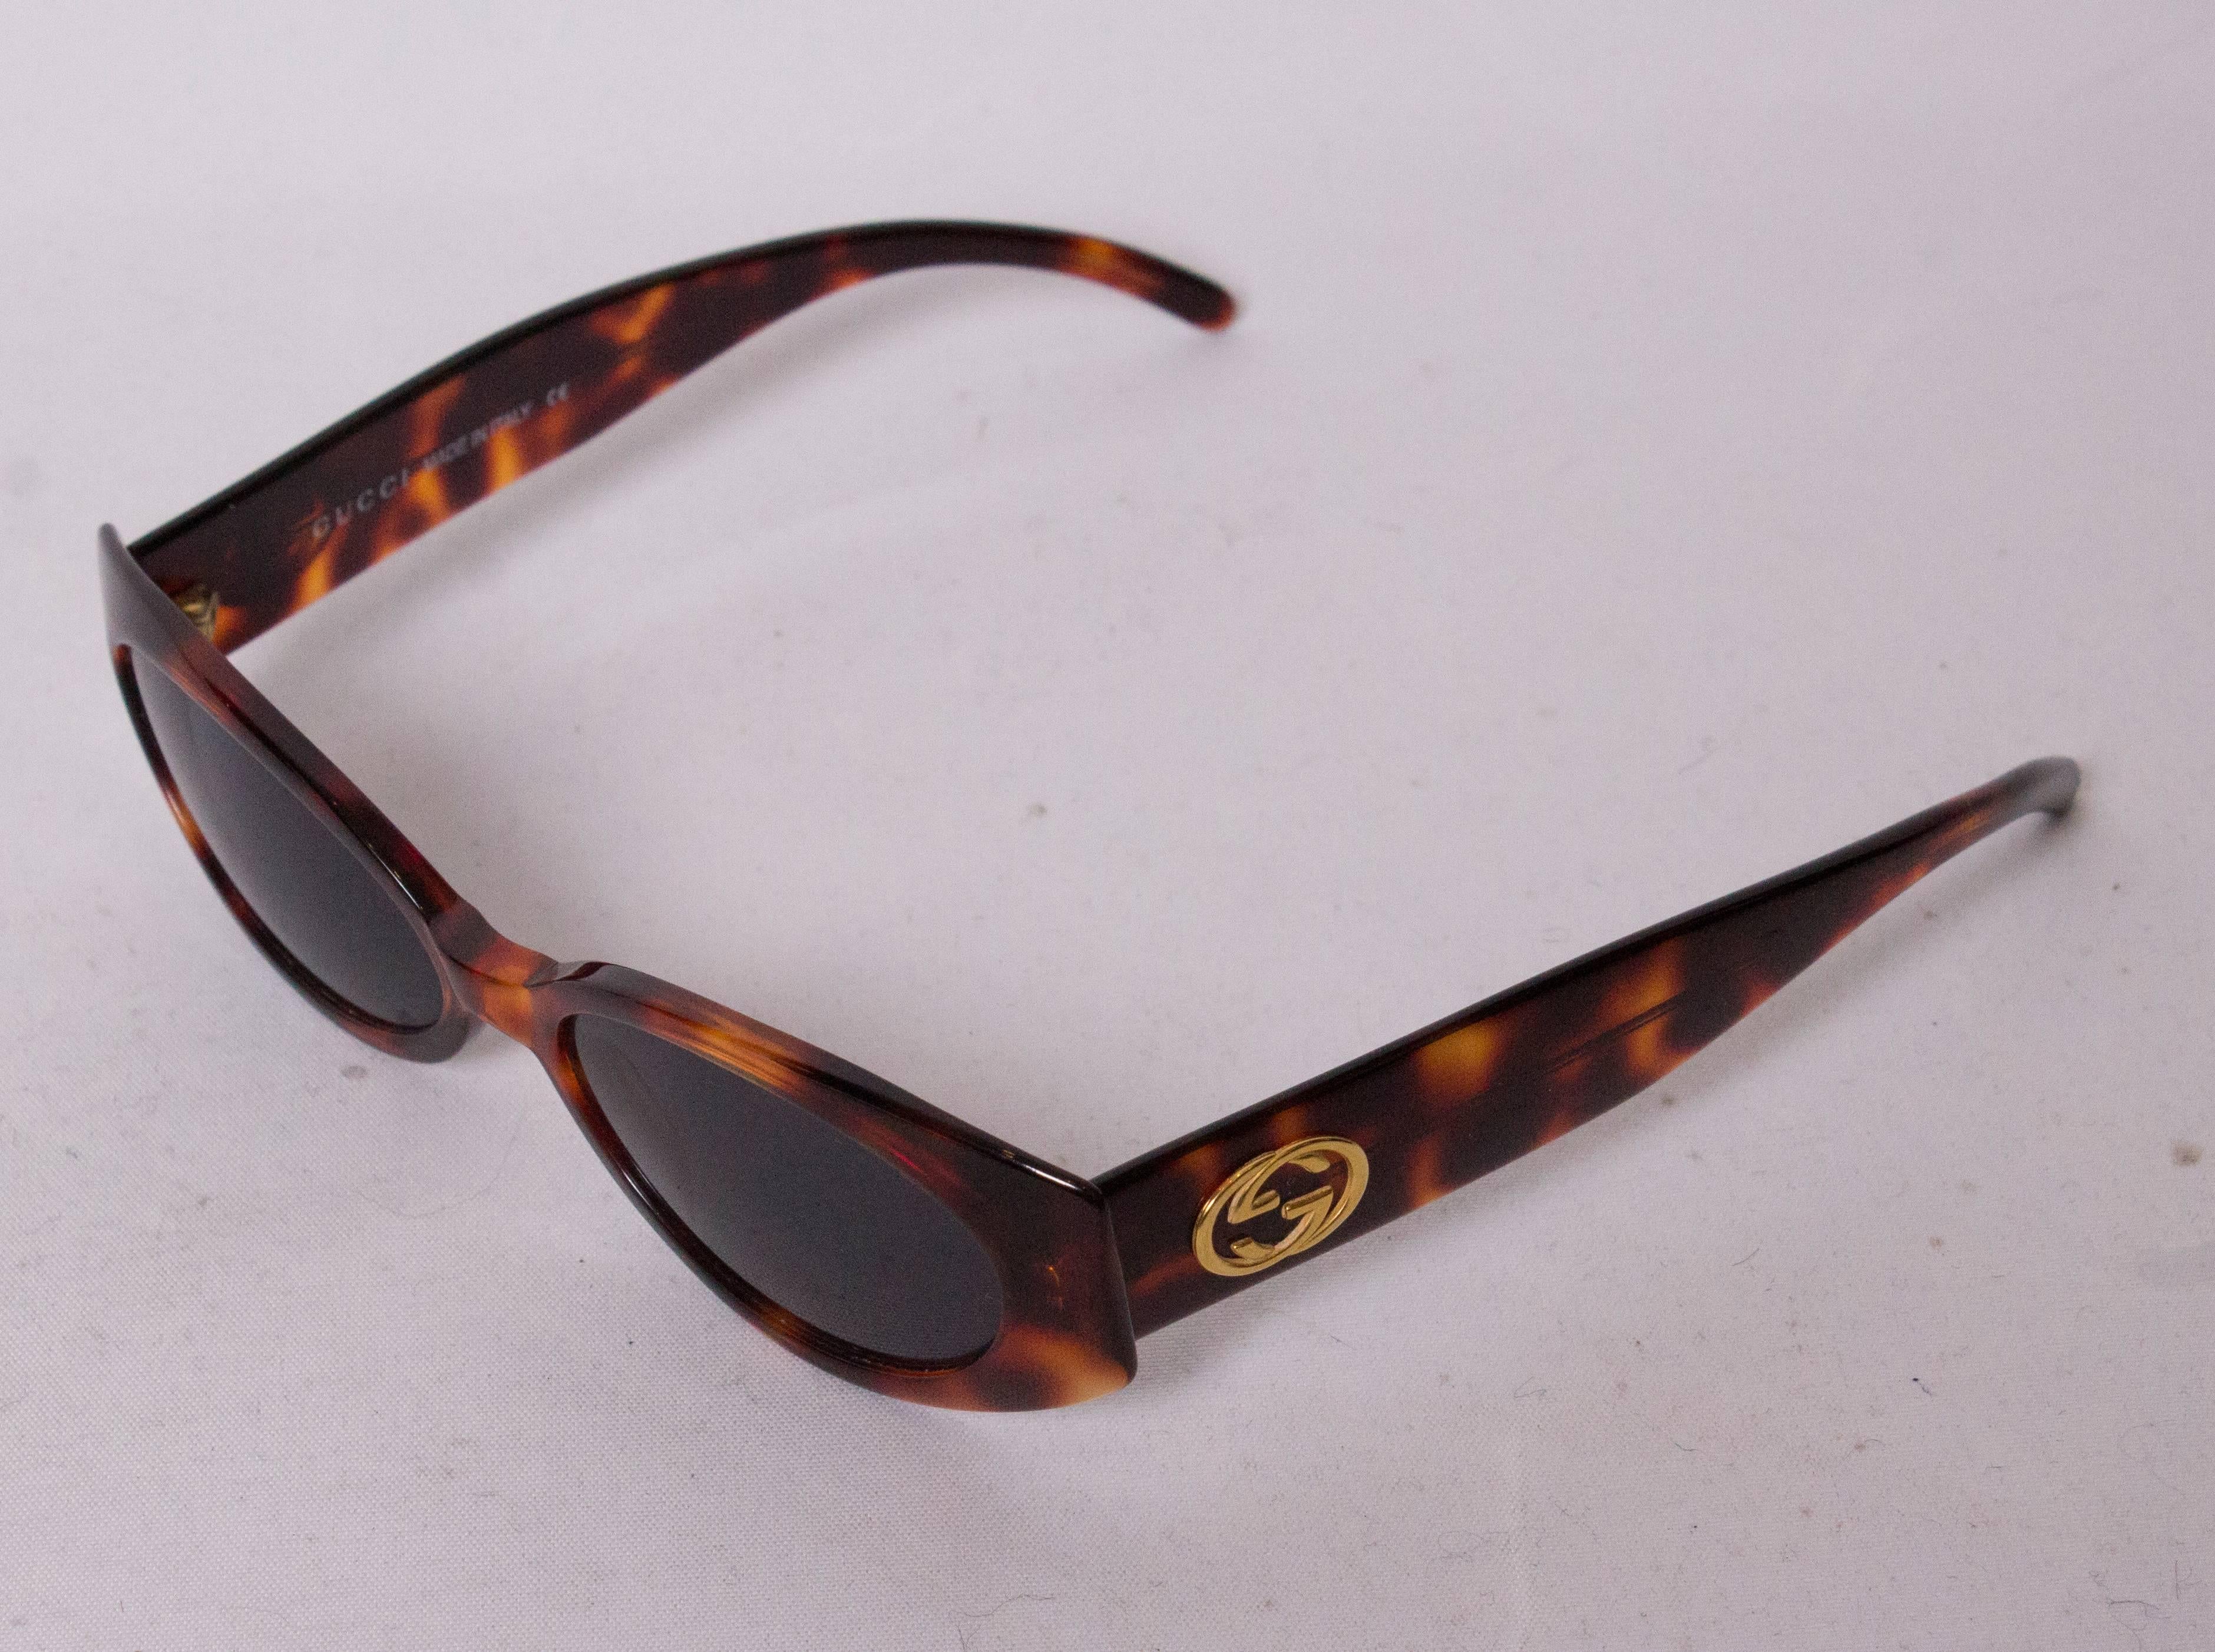 A chic pair of Gucci sunglasses with tortoise shell frames.They have the double G logo on the arm, and the serial number is 145 GG 2196 /S